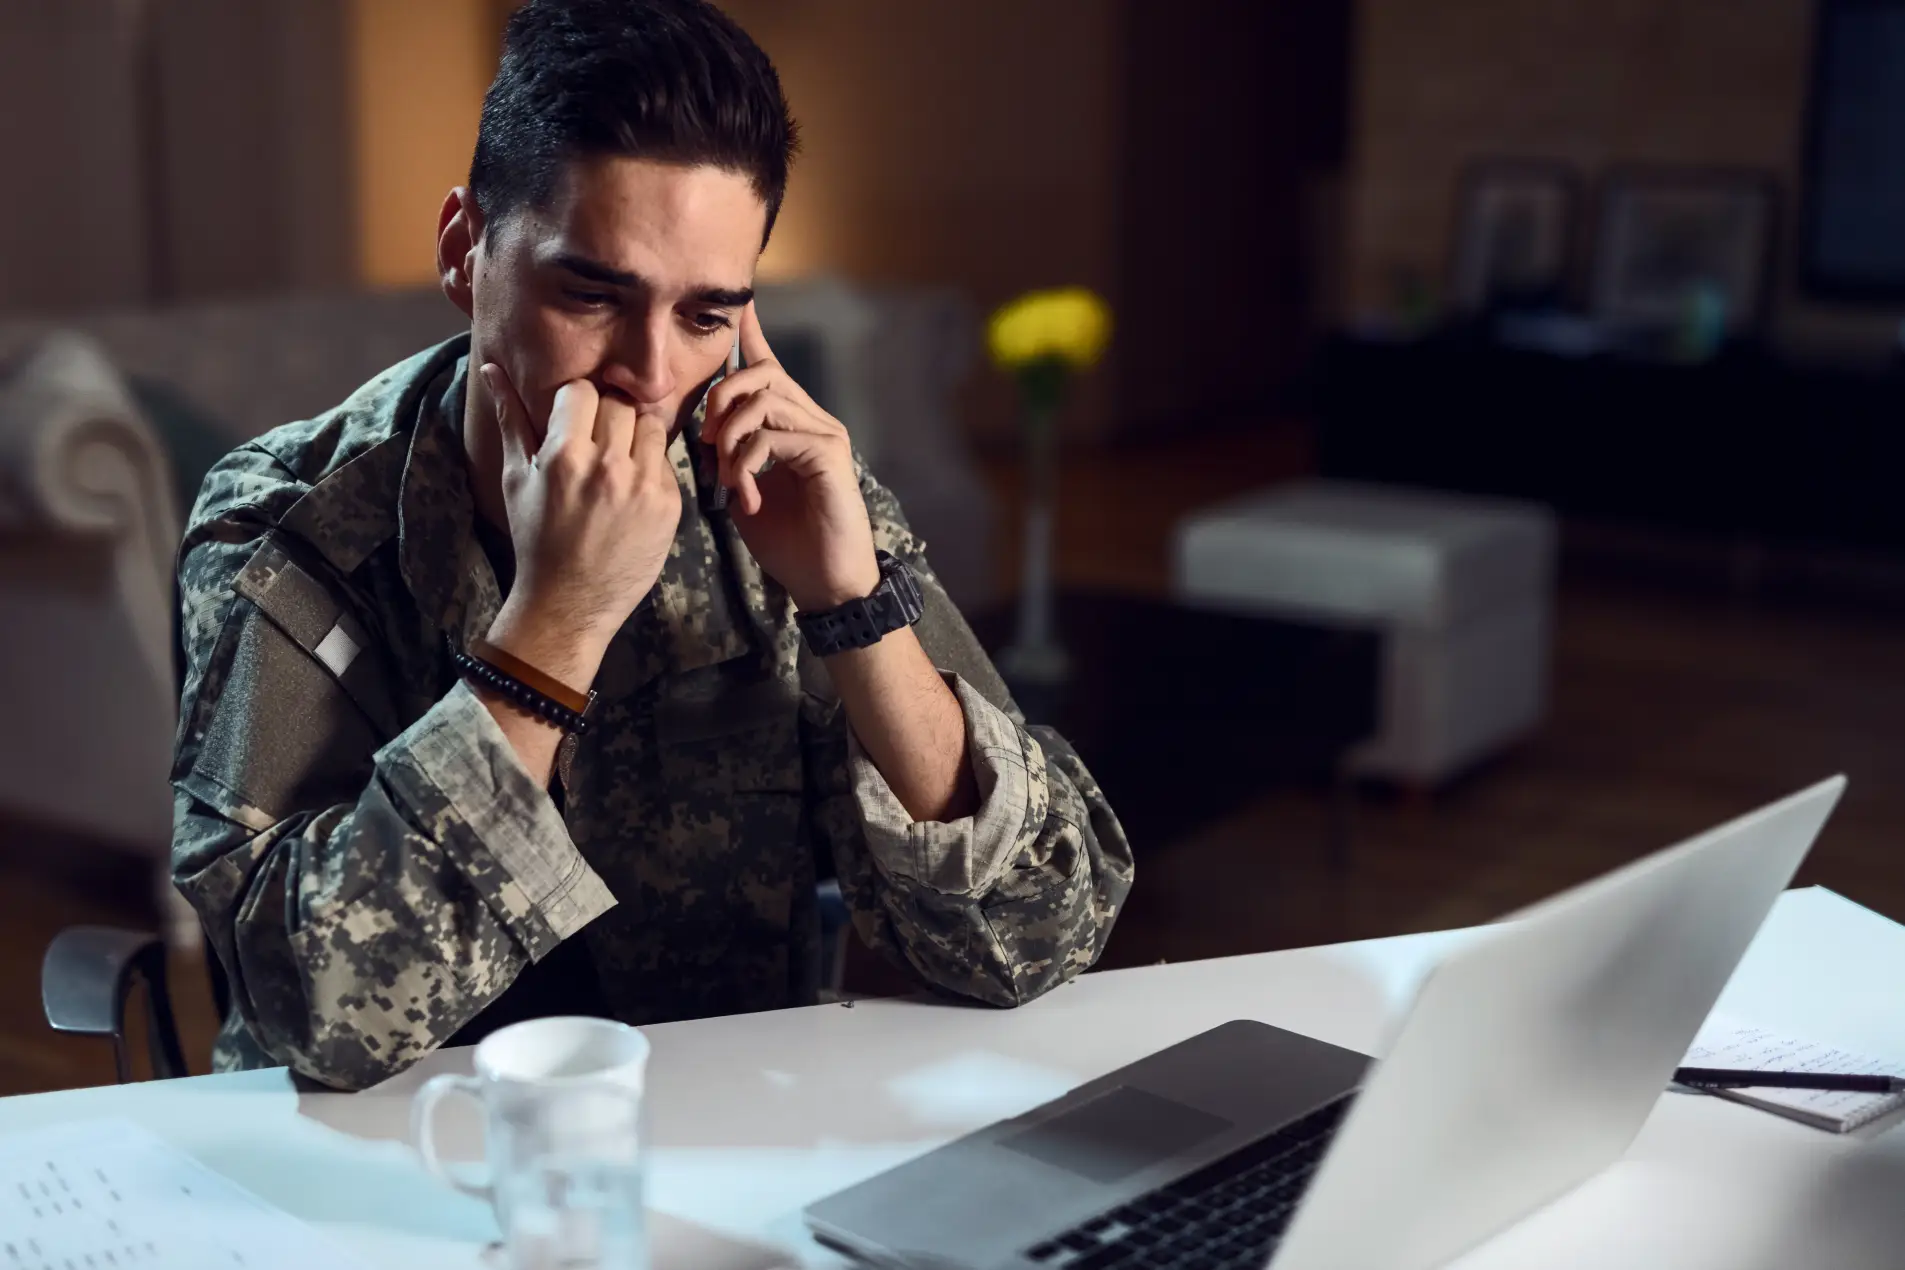 self reporting substance use and addiction in the military